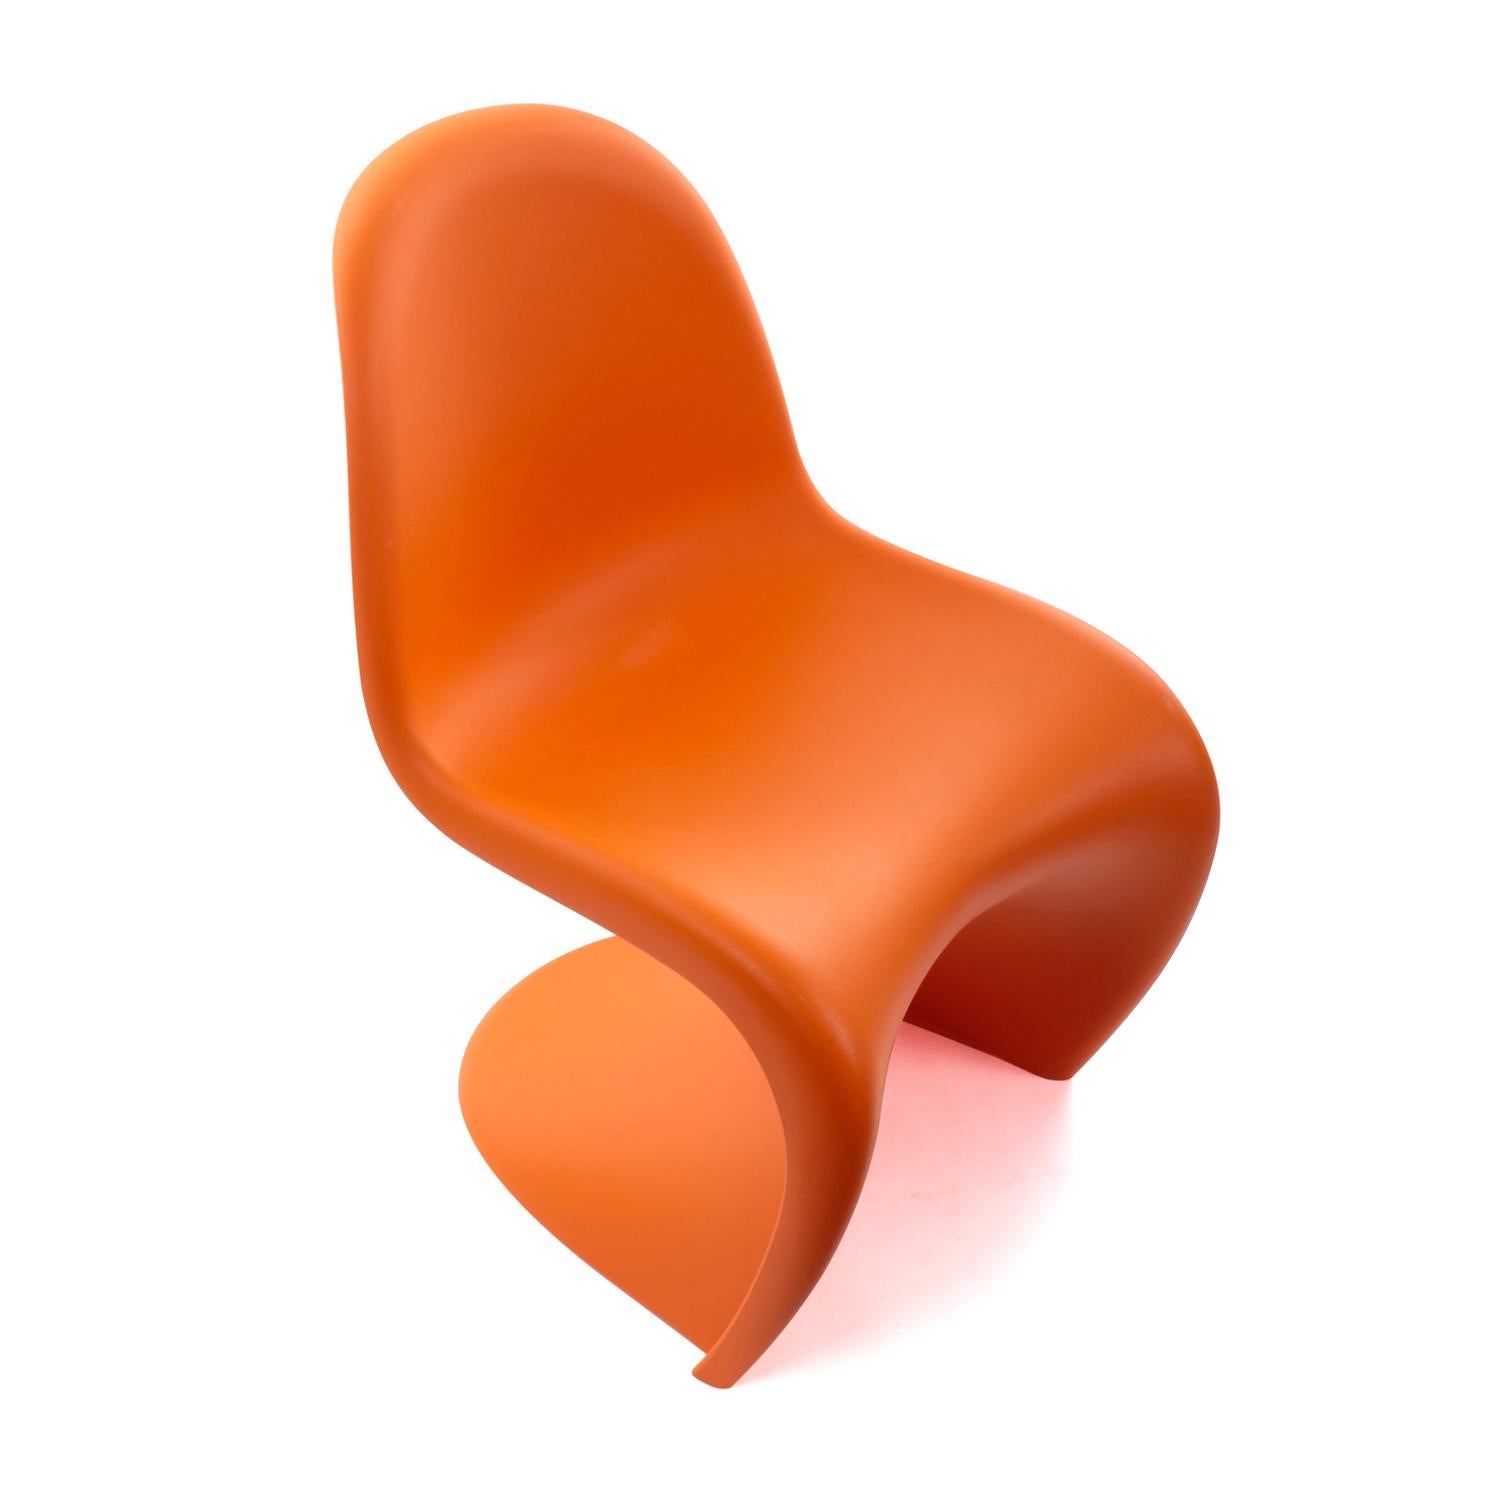 Panton Junior chair - designed by Verner Panton in 1960 and produced by Vitra from 2008 - an iconic design, in children's size. In good vintage condition.

By pushing the materials to the limit, Panton created one of the most award-winning chairs